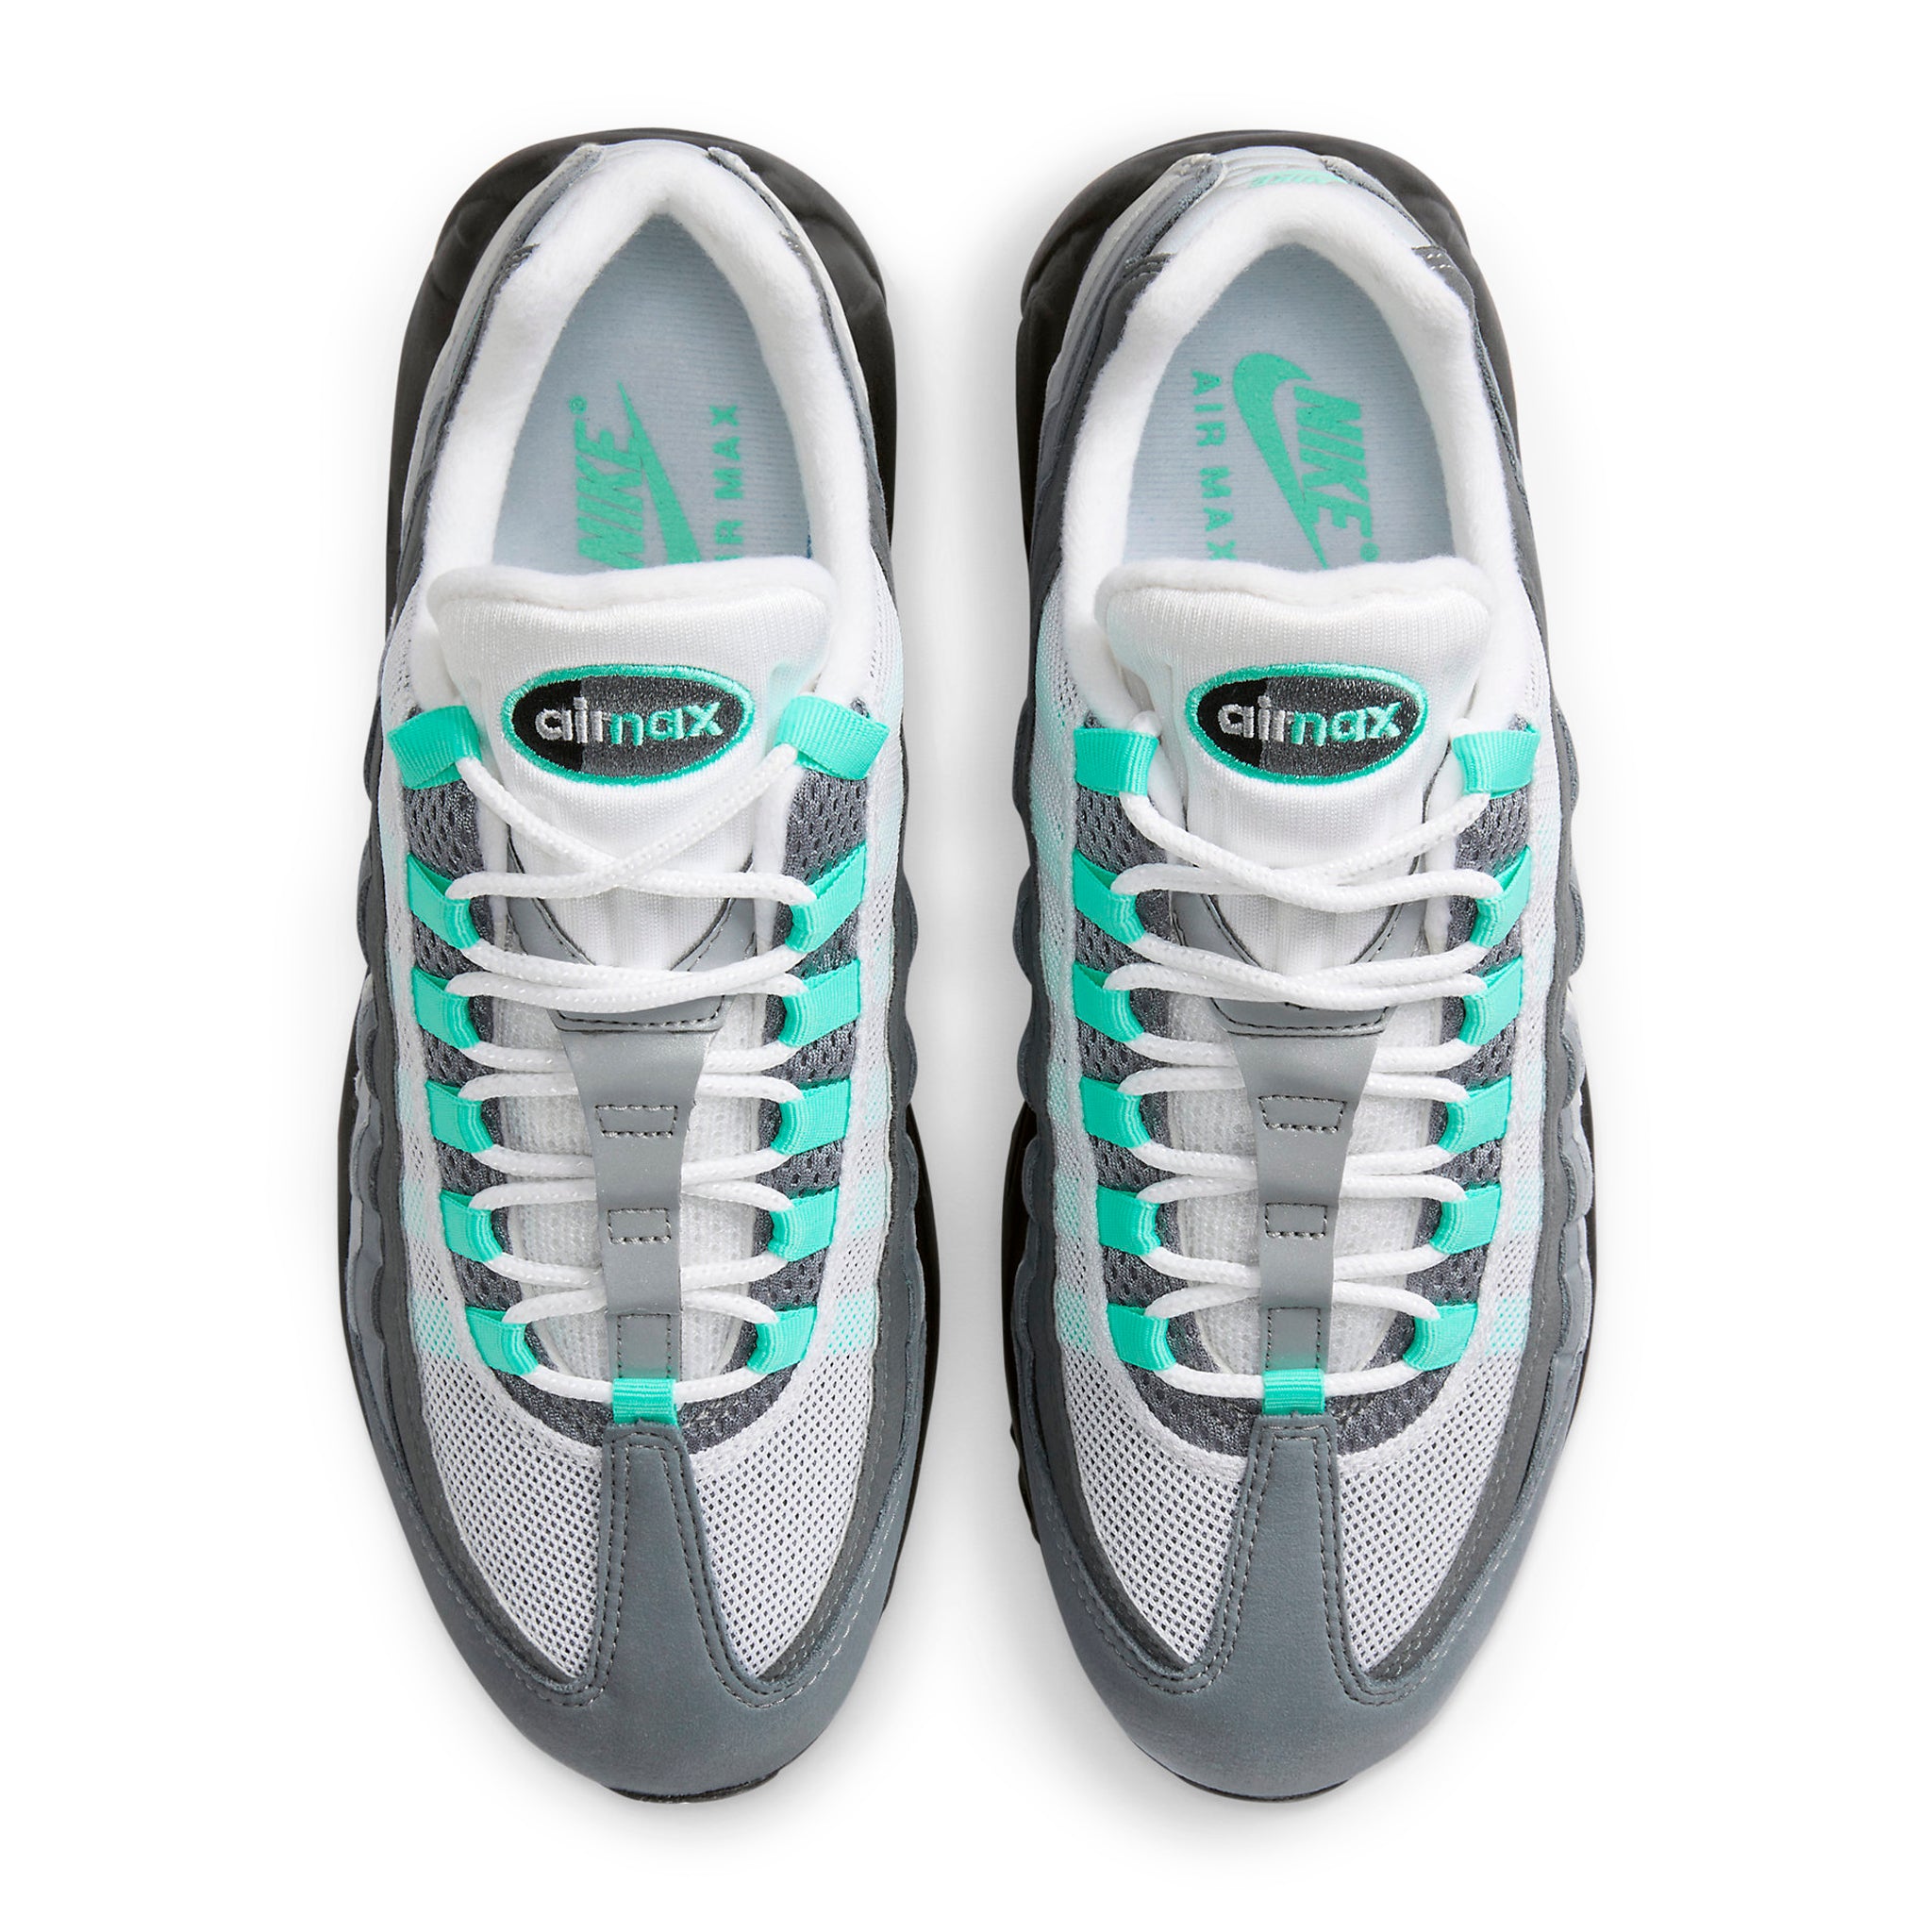 Top view of Nike Air Max 95 Hyper Turquoise FV4710-100